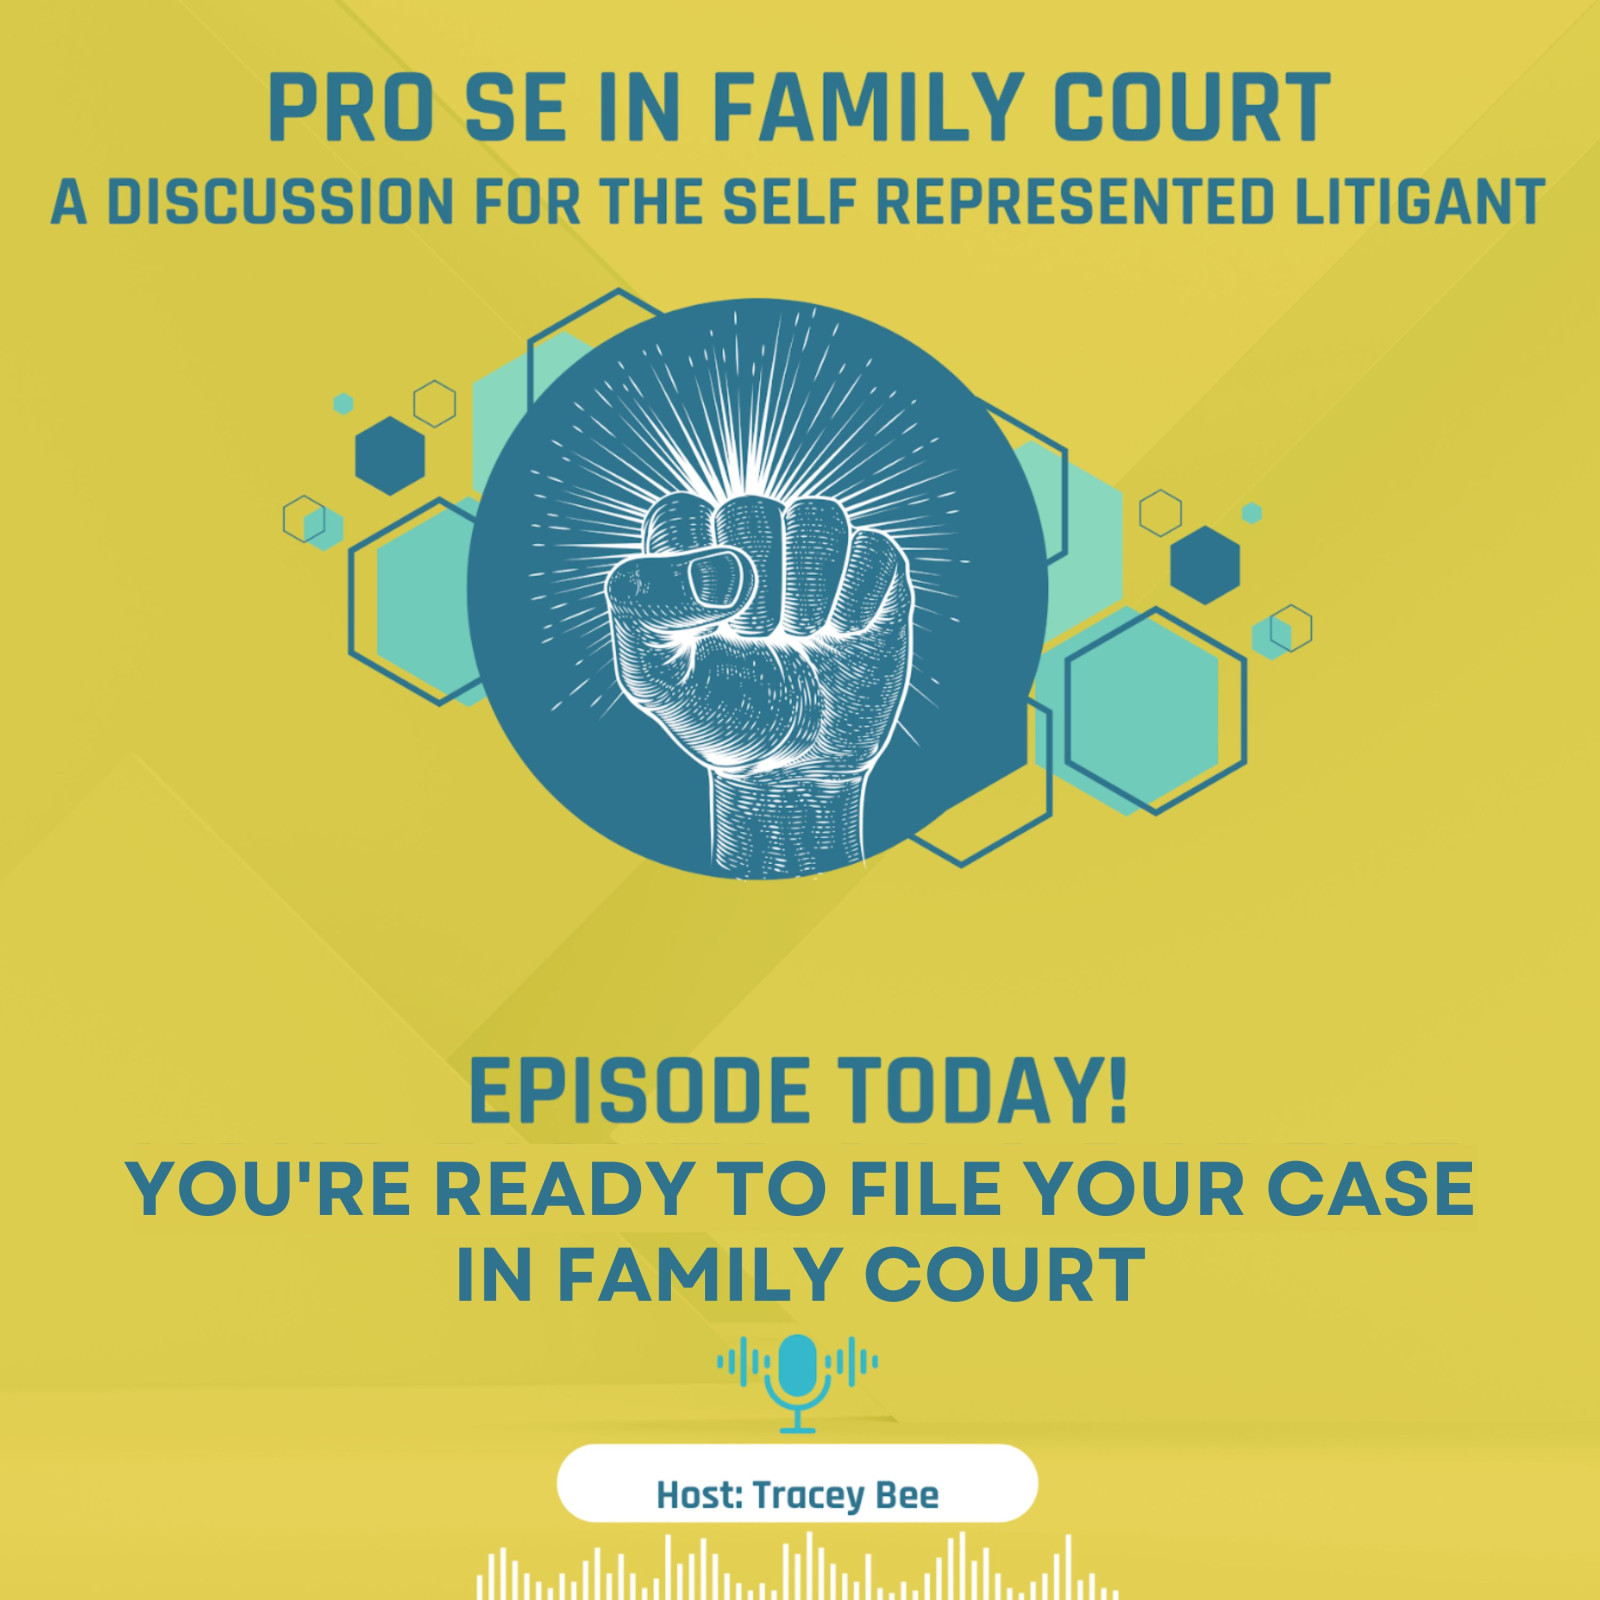 Episode 11: You're Ready to File Your Case in Family Court